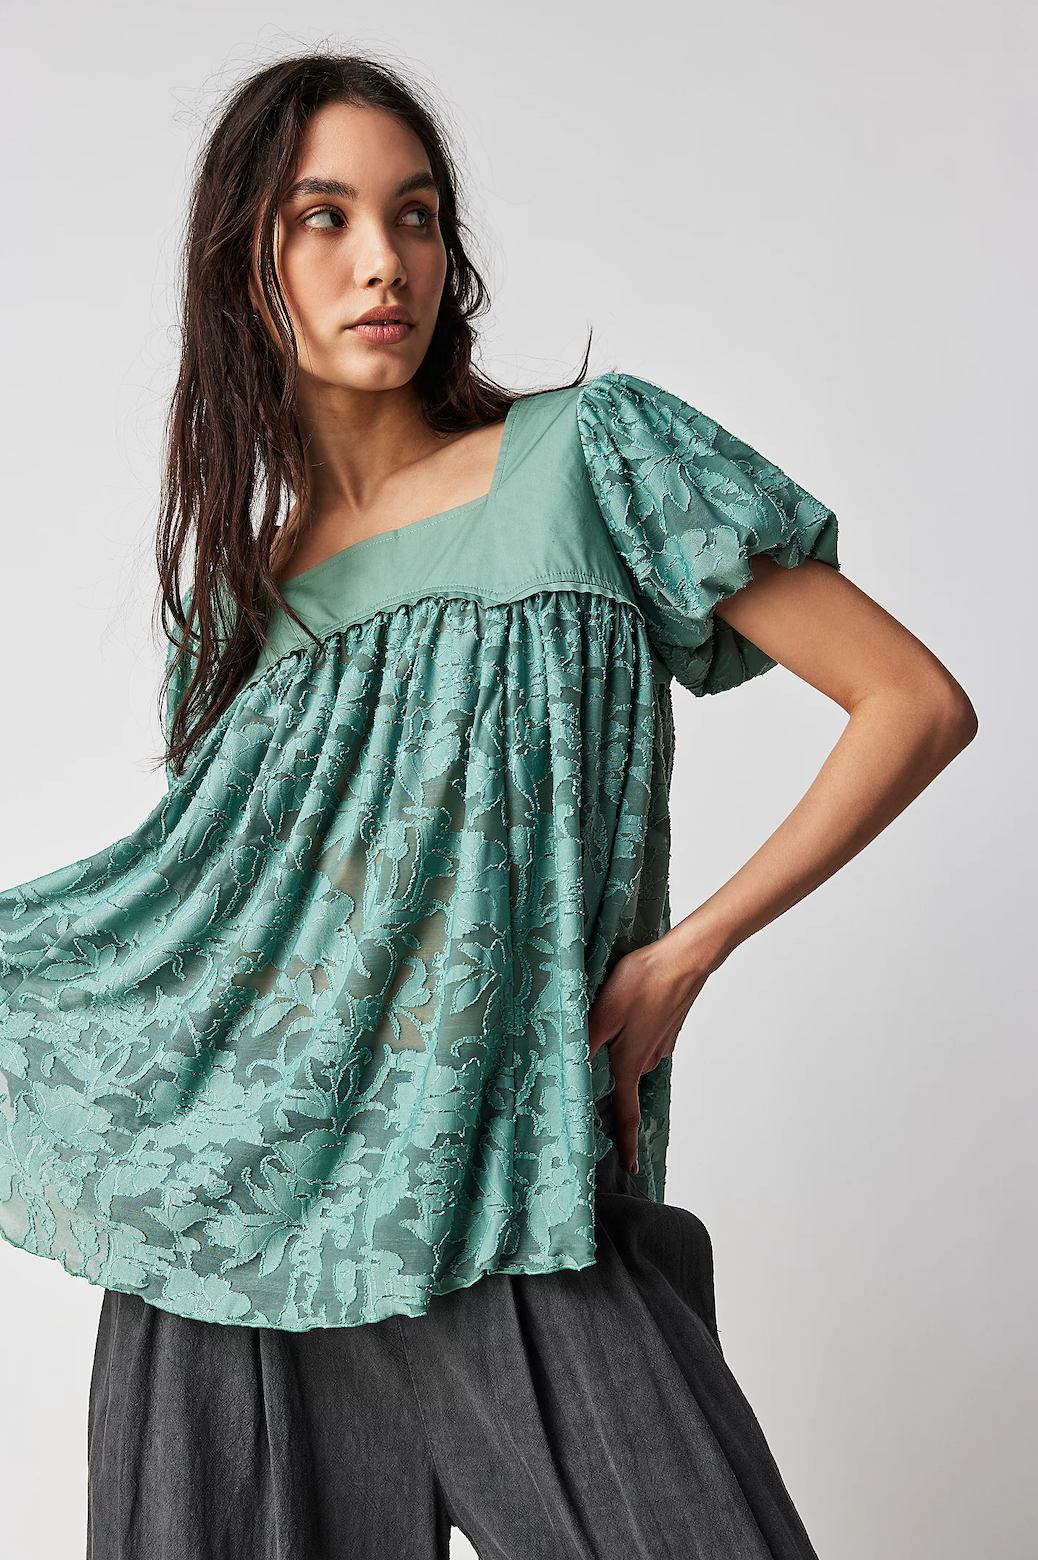 FREE PEOPLE SUNRISE TO SUNSET TOP IN MALACHITE